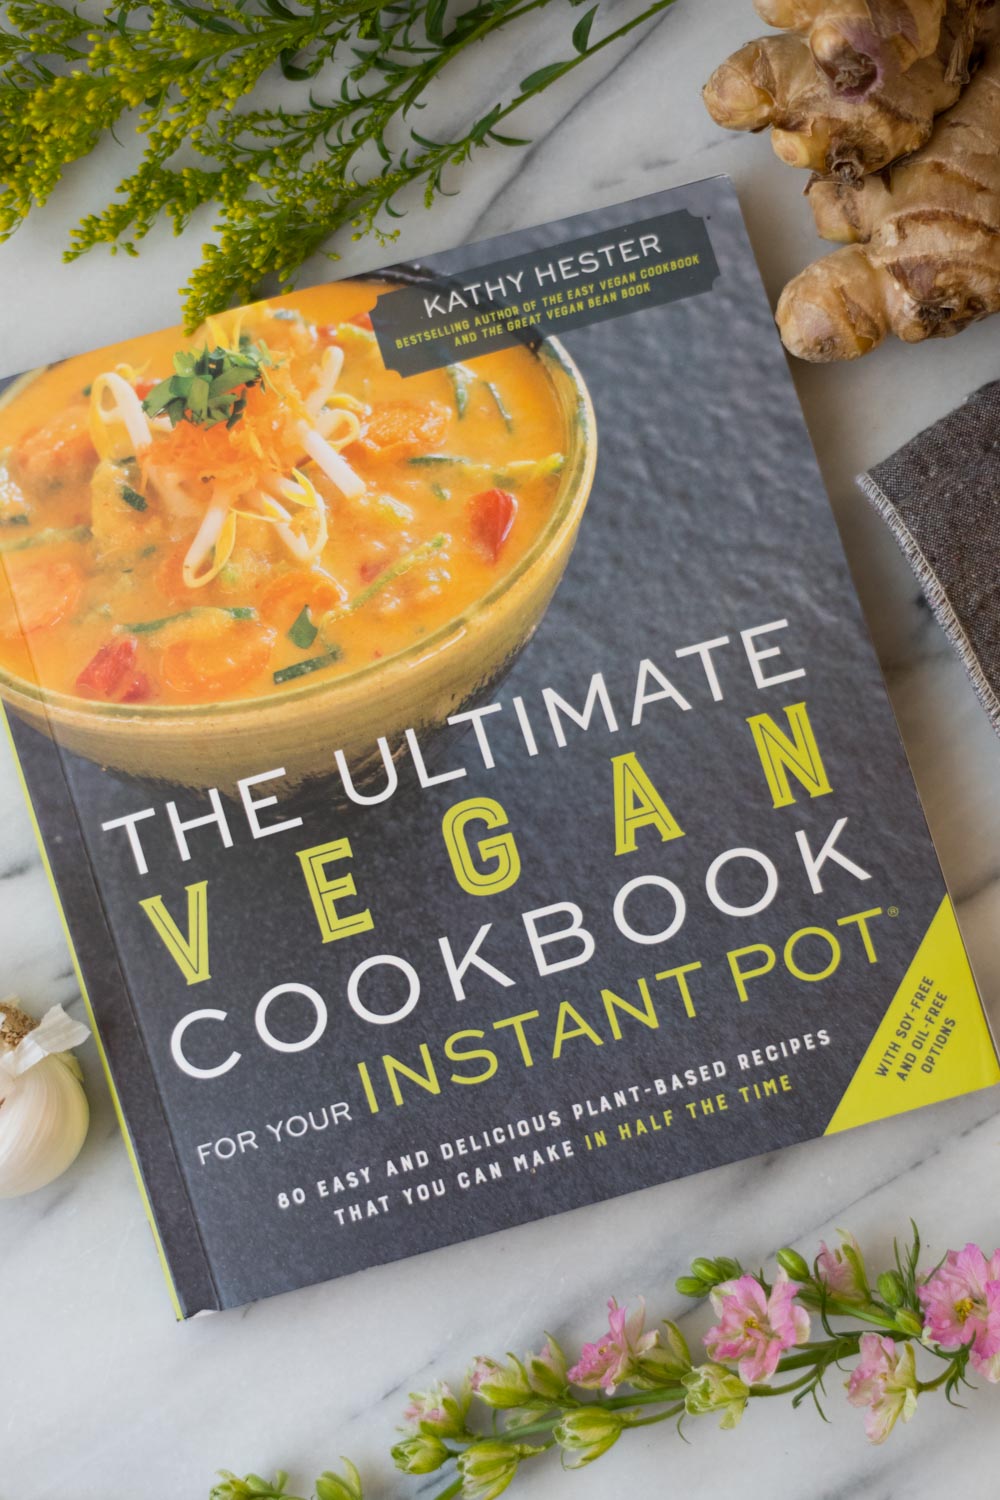 Kathy Hester's latest cookbook: The Ultimate Vegan cookbook for your Instant Pot